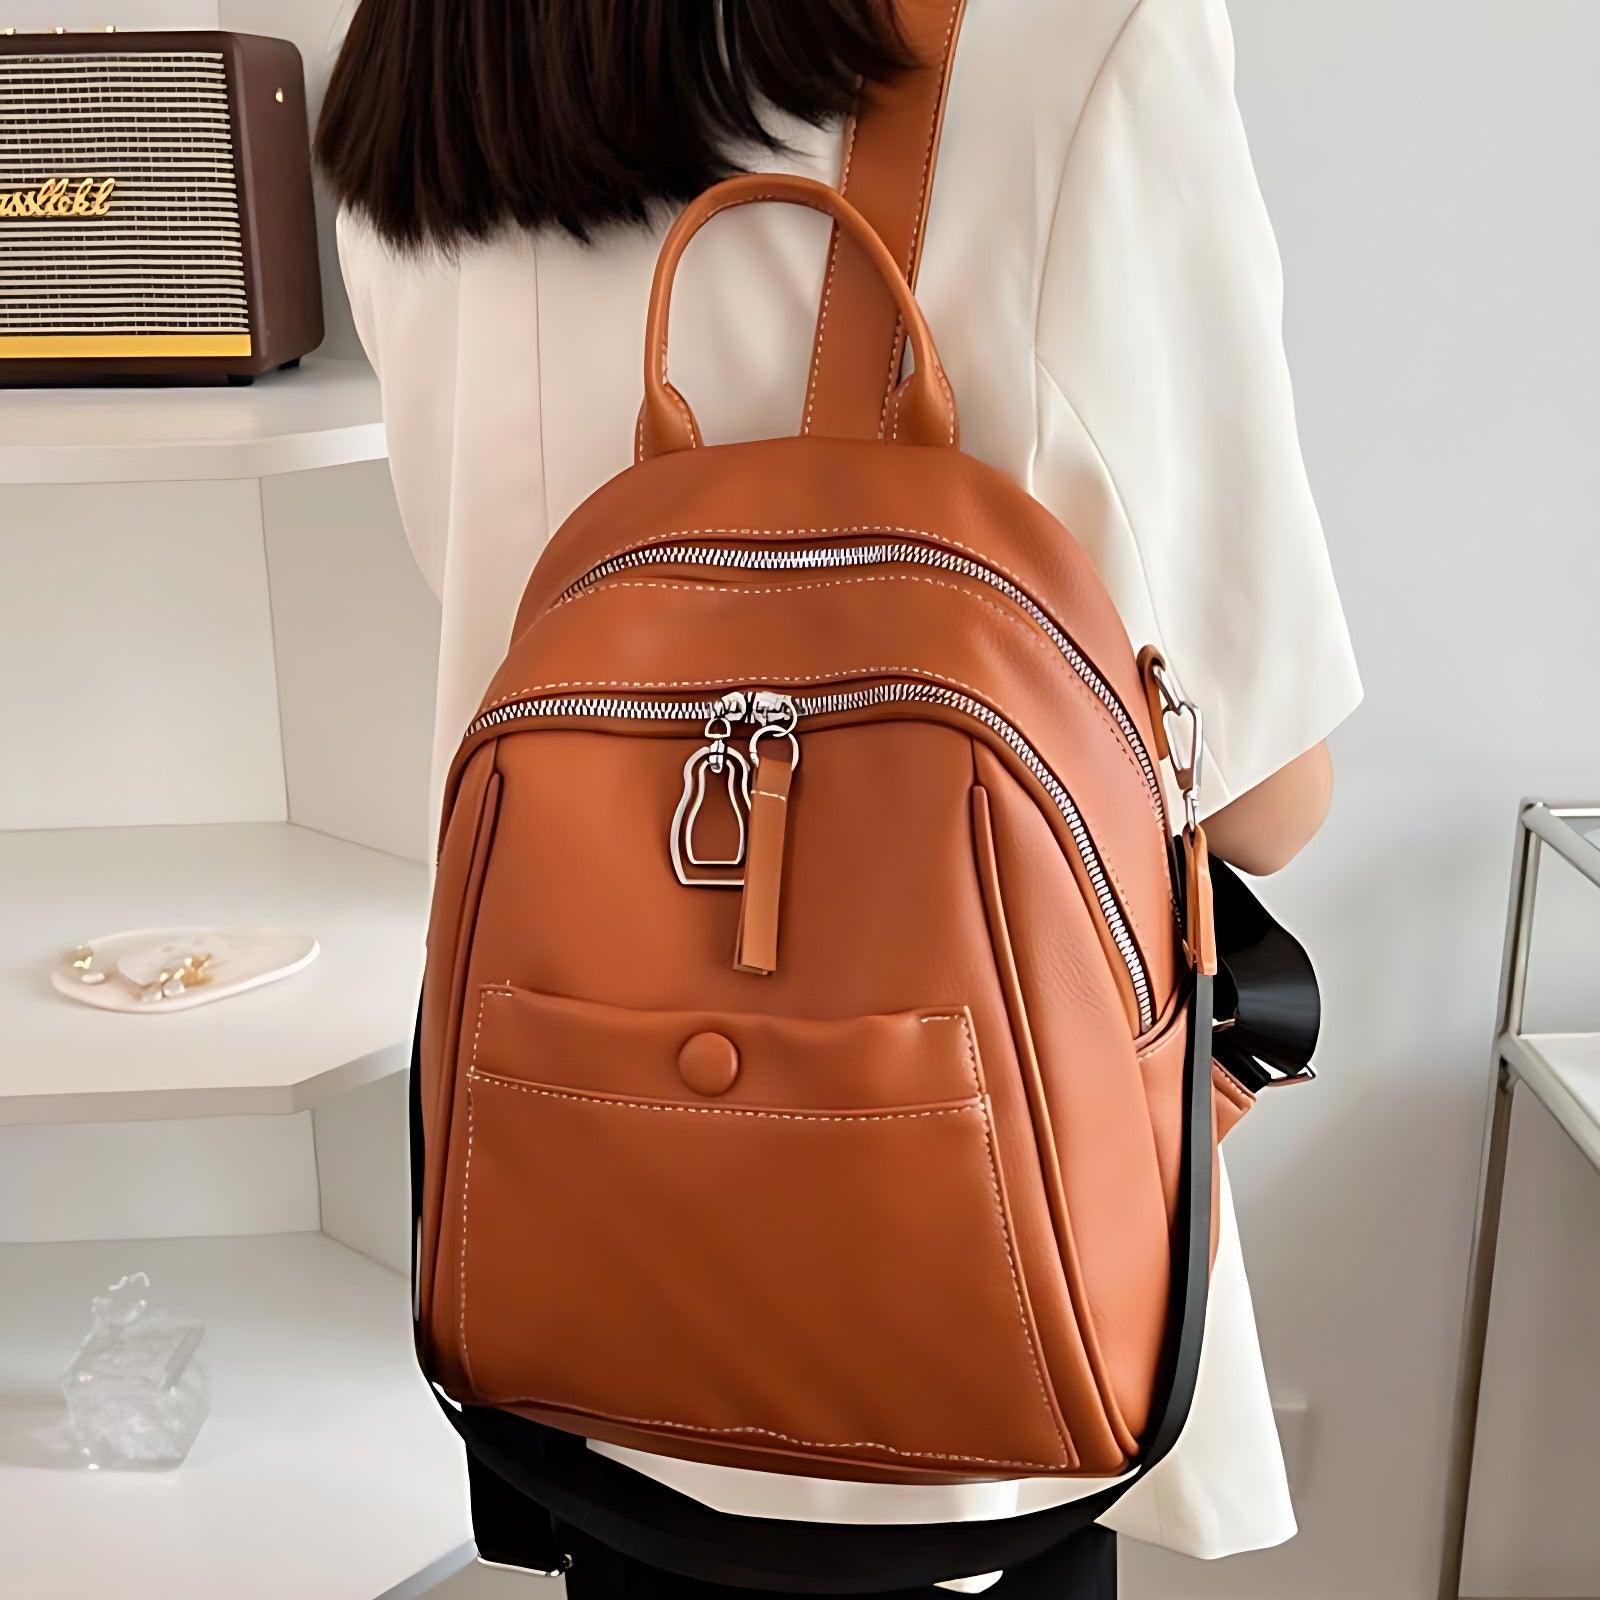 Best Backpacks For High School Girls - Touchy Style .